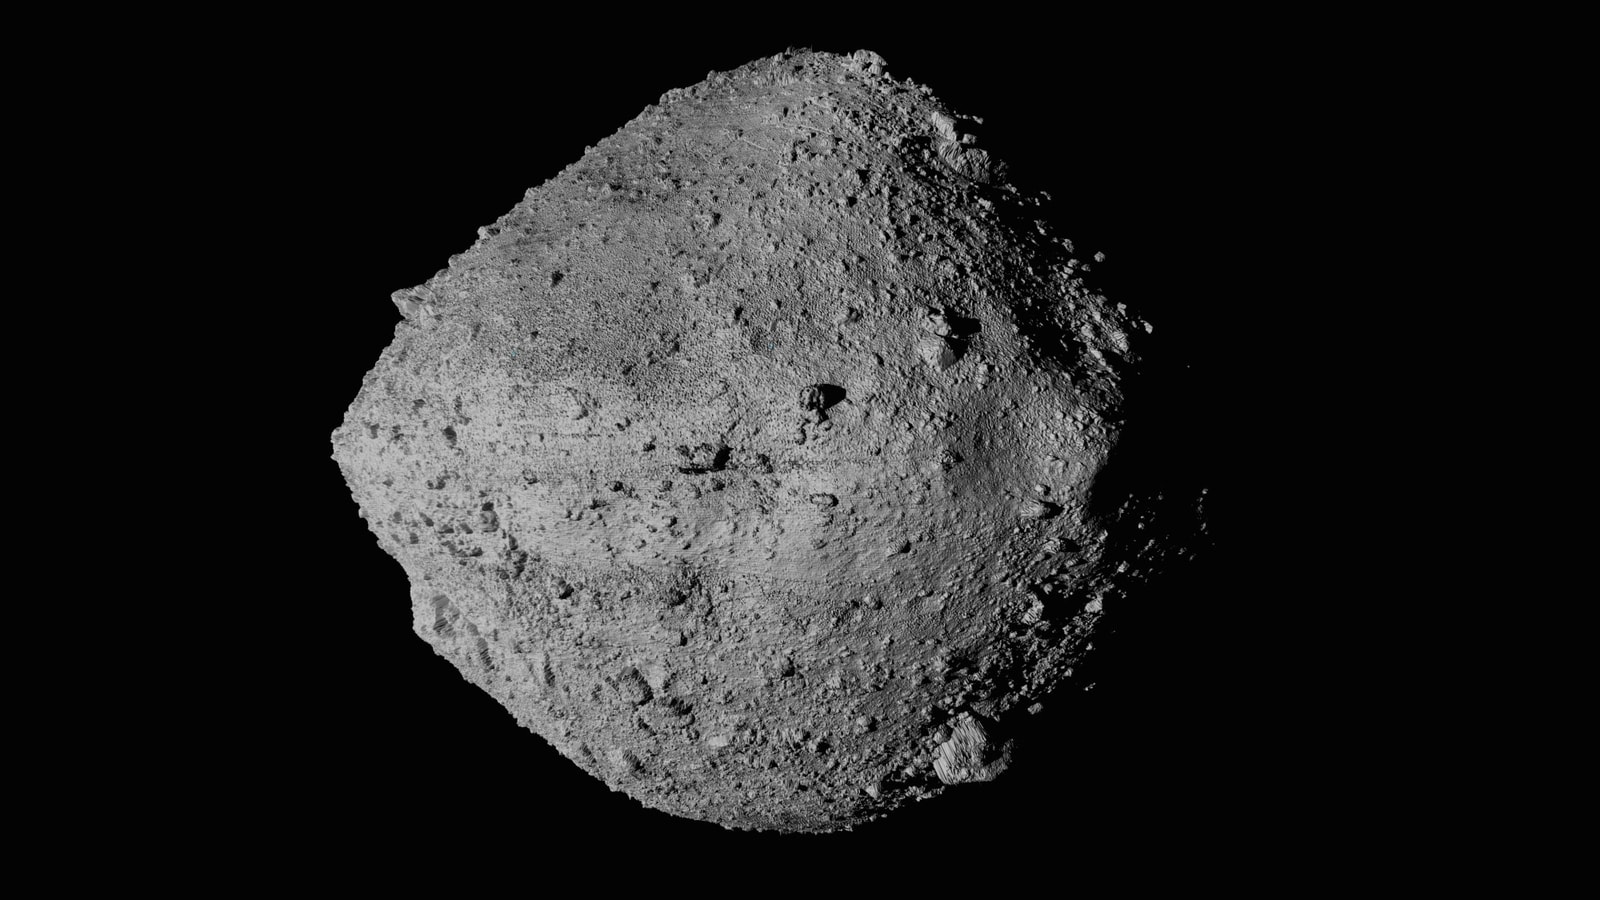 All about asteroid Bennu, a ticking n-bomb that could destroy Earth and NASA's mission to prevent it